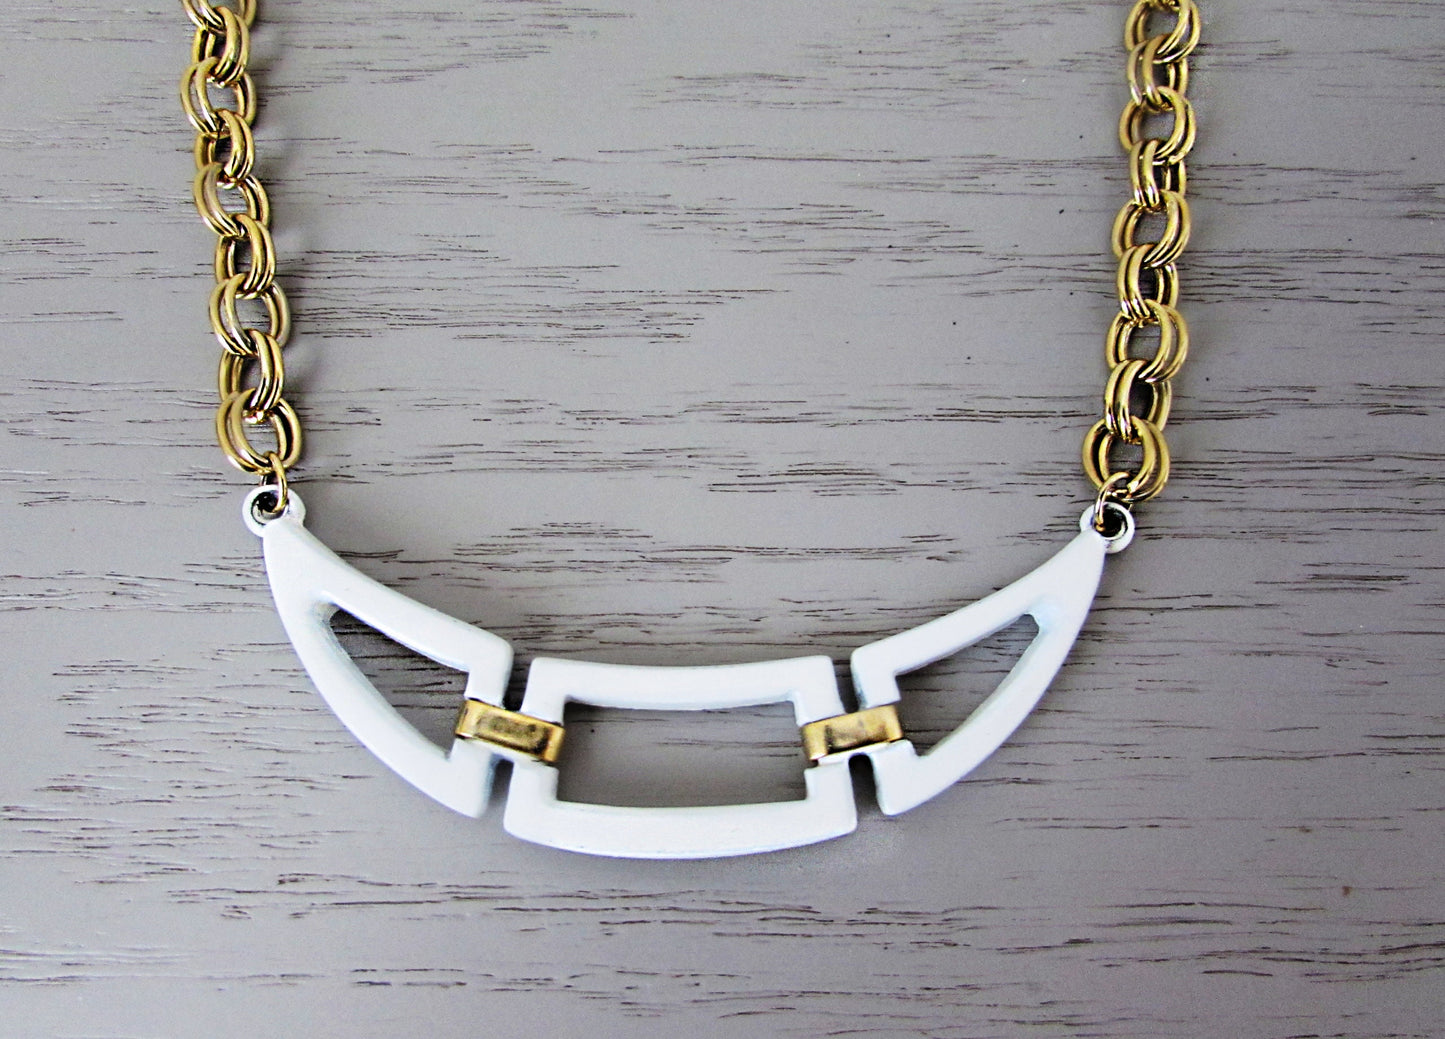 Vintage Geometric Necklace, White and Gold Metal Bib Necklace, Minimalist Double Link Gold Chain Necklace with White Abstract Pendant